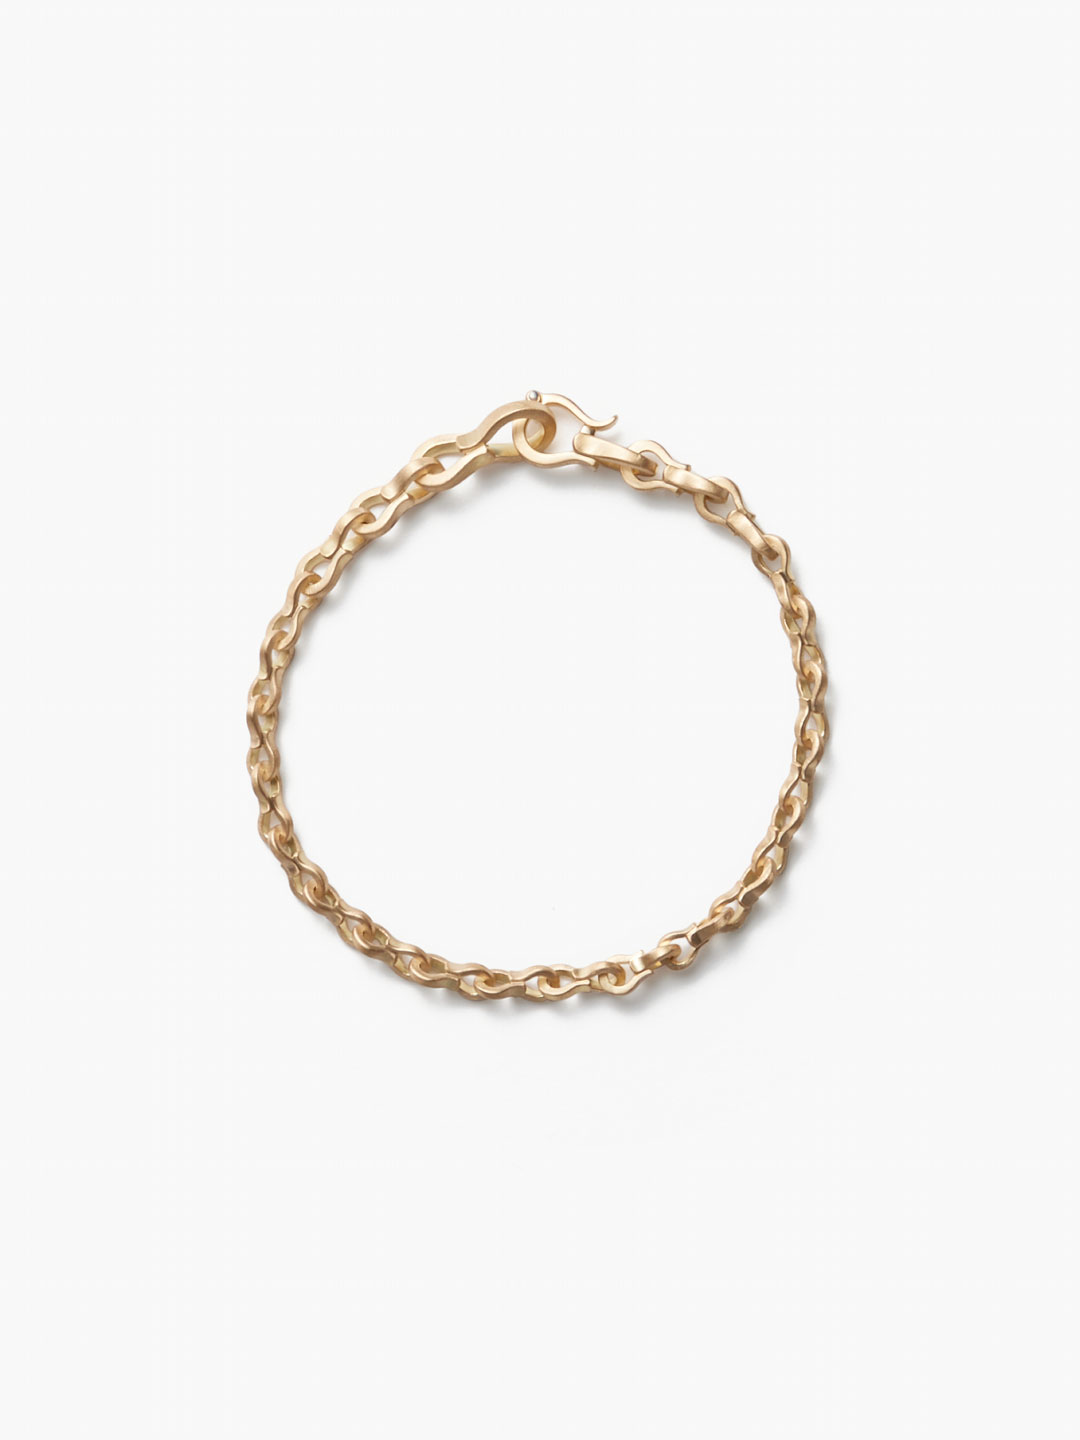 The Symbol Of Refined Metal Bracelet / 2S - Yellow Gold